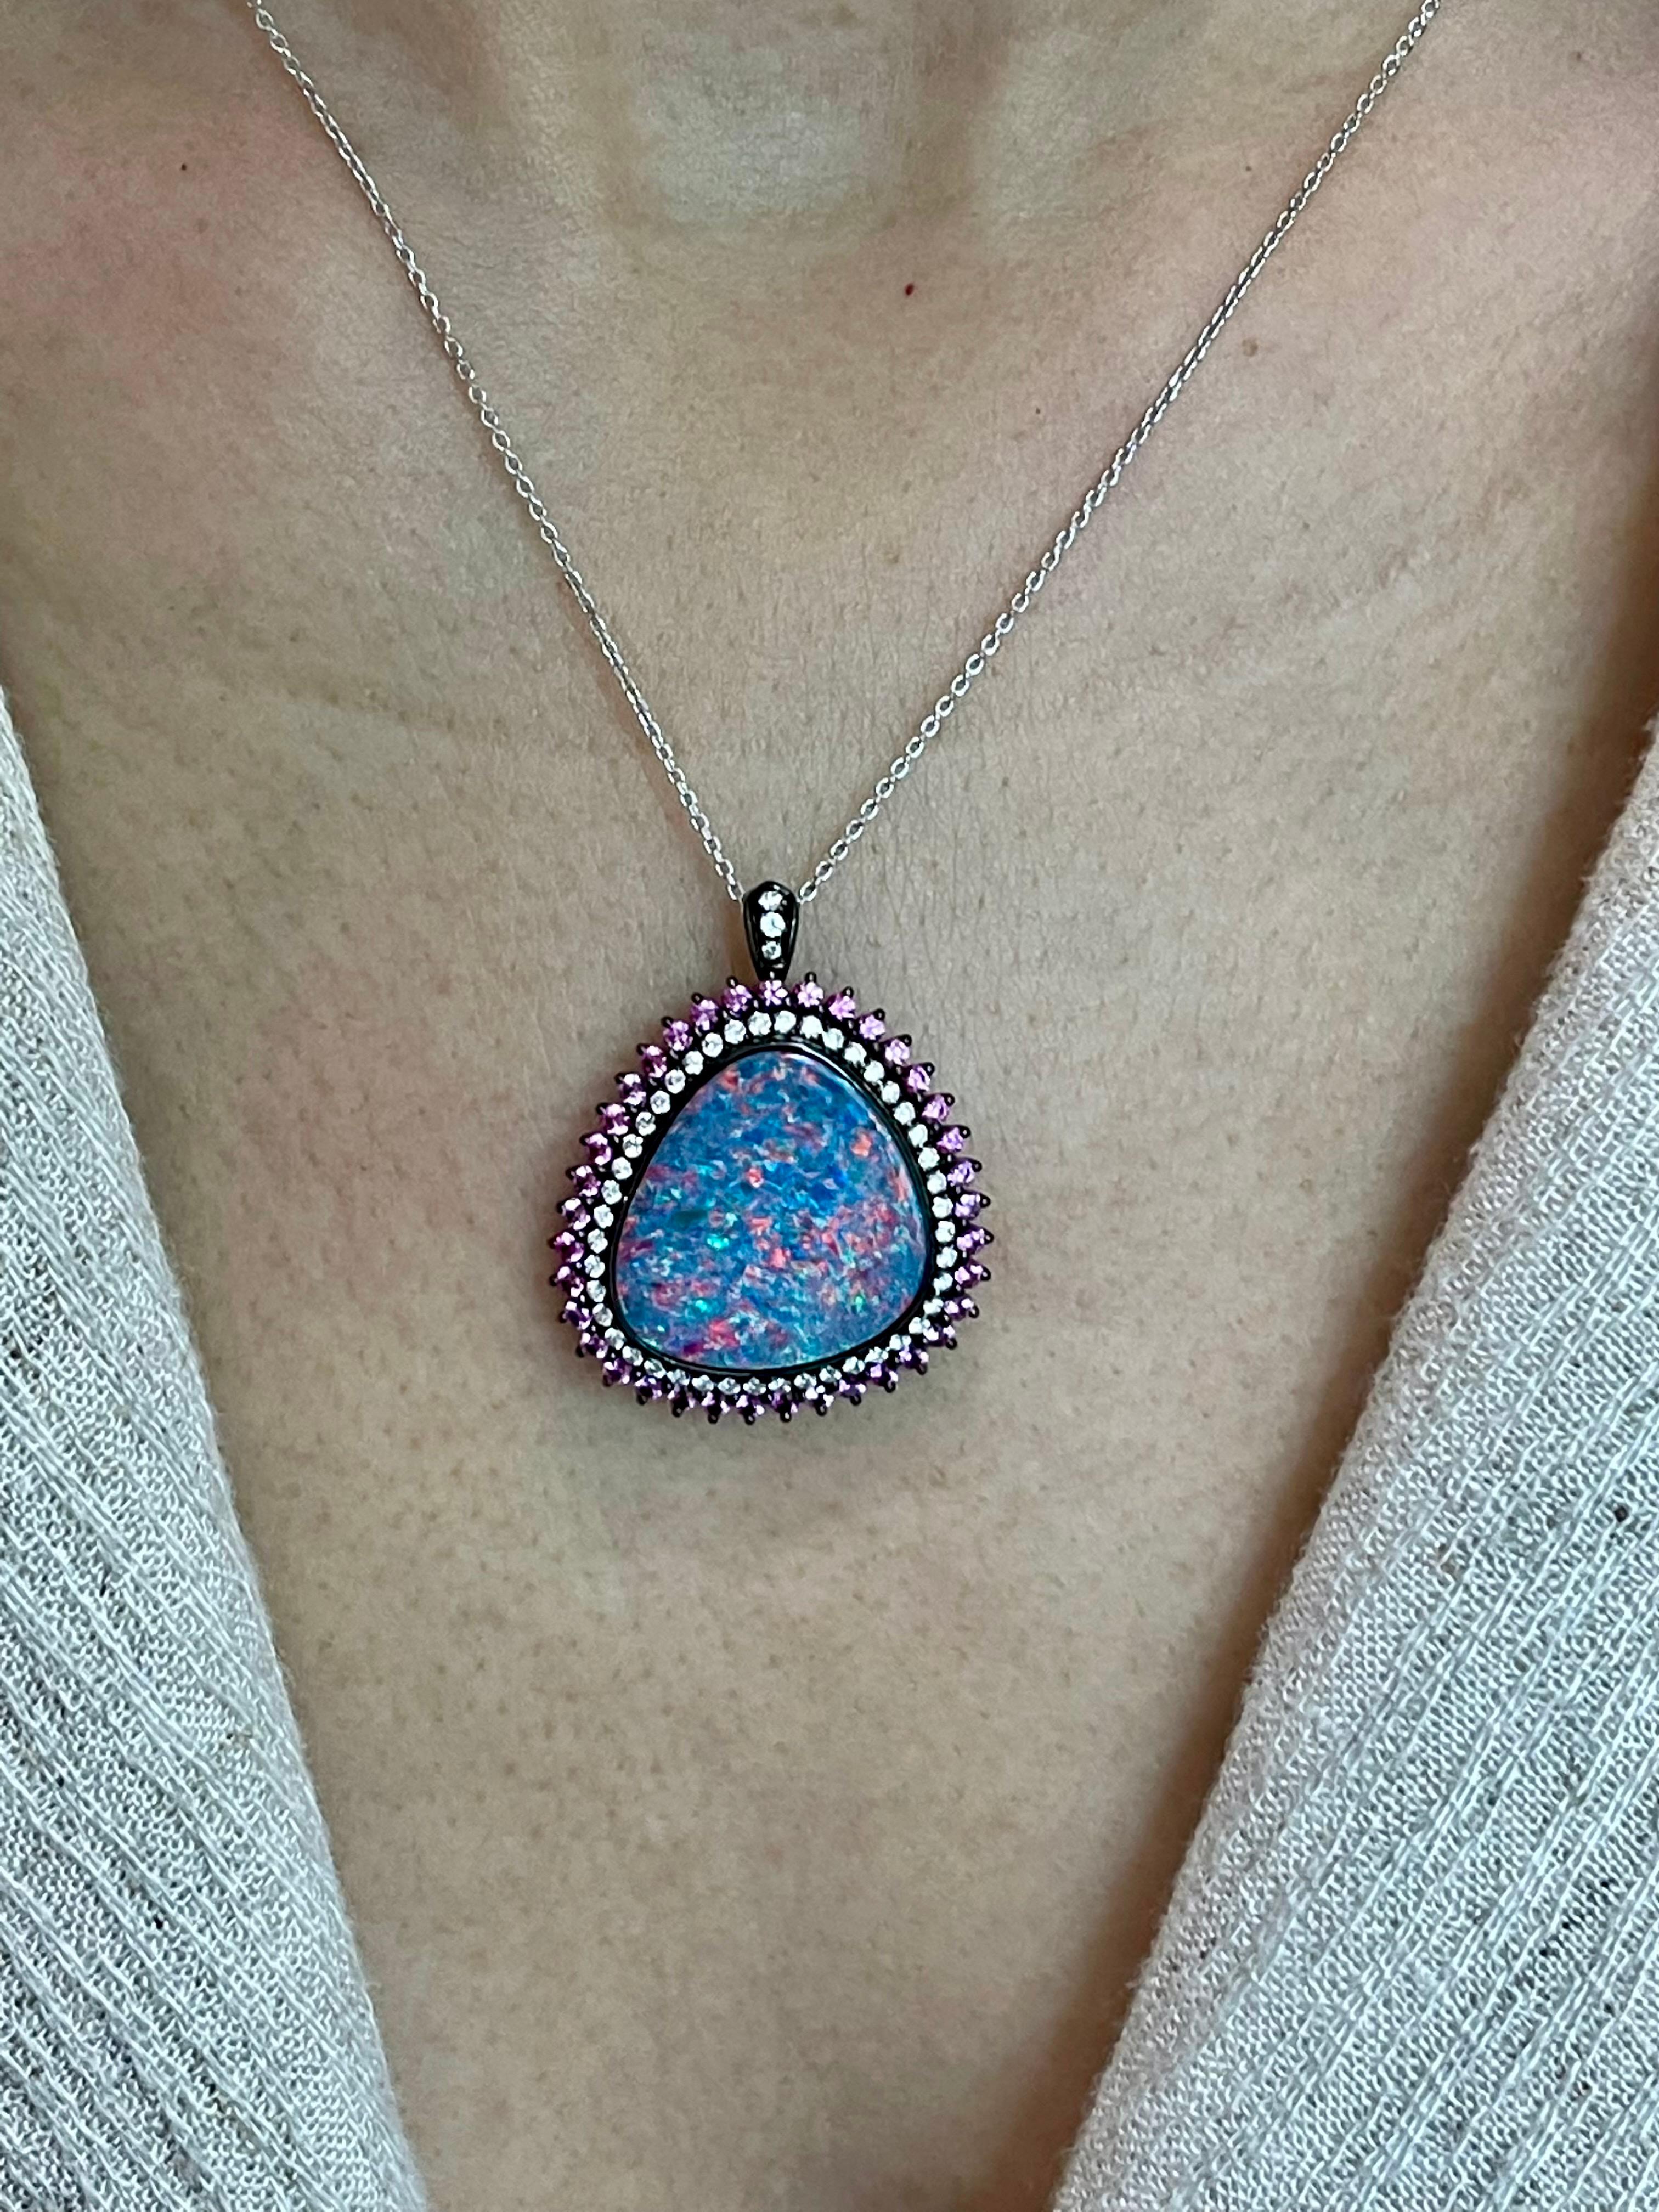 Please check out the HD video! This is an Australian doublet Opal! When it comes to opals, one of the most important character people look for is the play of color. The Australian opal in this ring / pendant has superb play of color. Its got all the